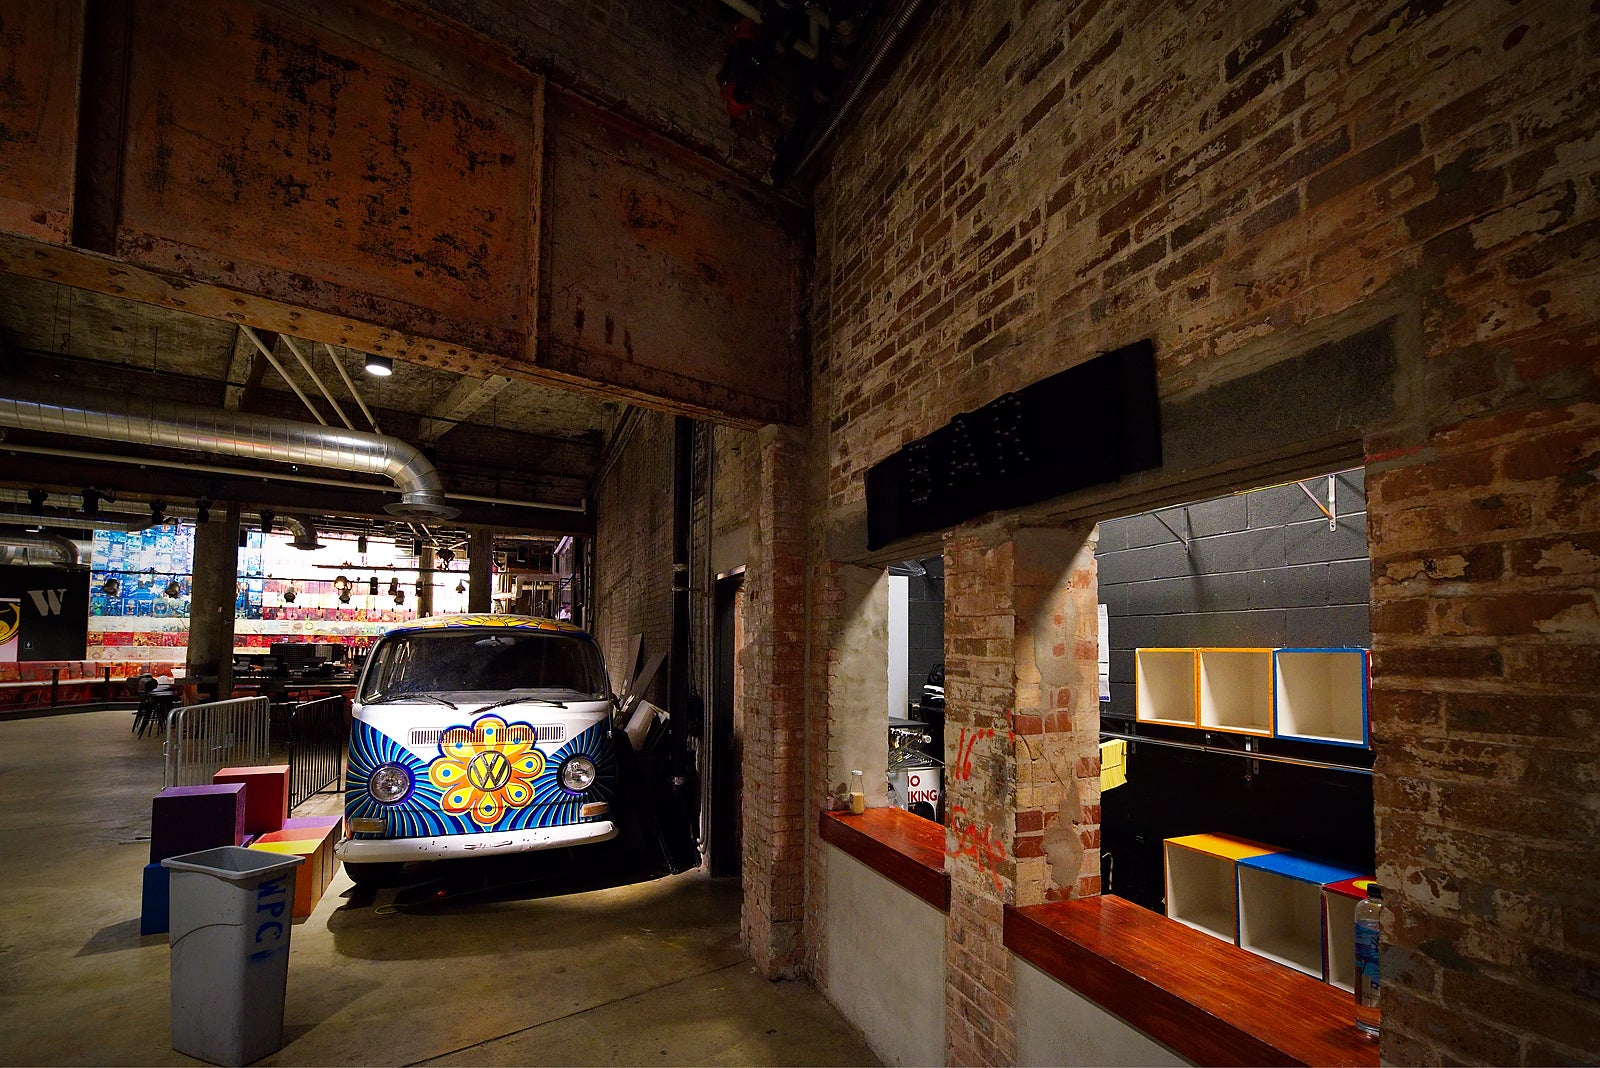 Large steel beams and exposed brick wall from the original structure are visible in the Fillmore's main lobby. (Bastiaan Slabbers for PlanPhilly)